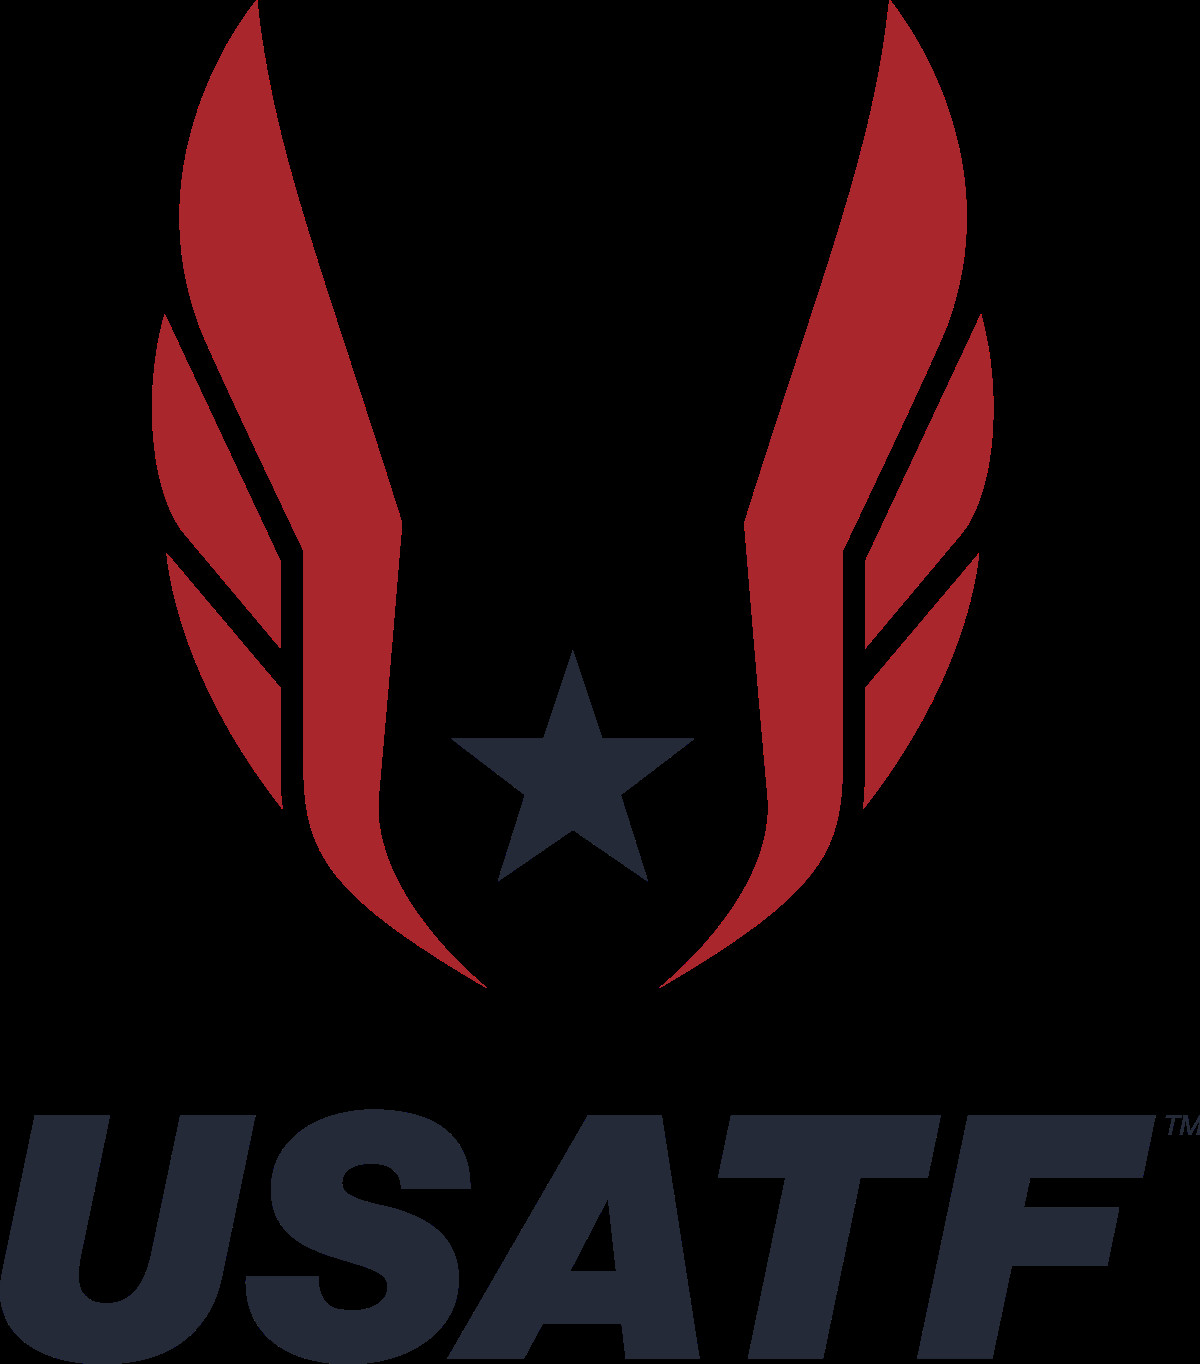 USATF Releases Itâ€™s Return To Training Guidance